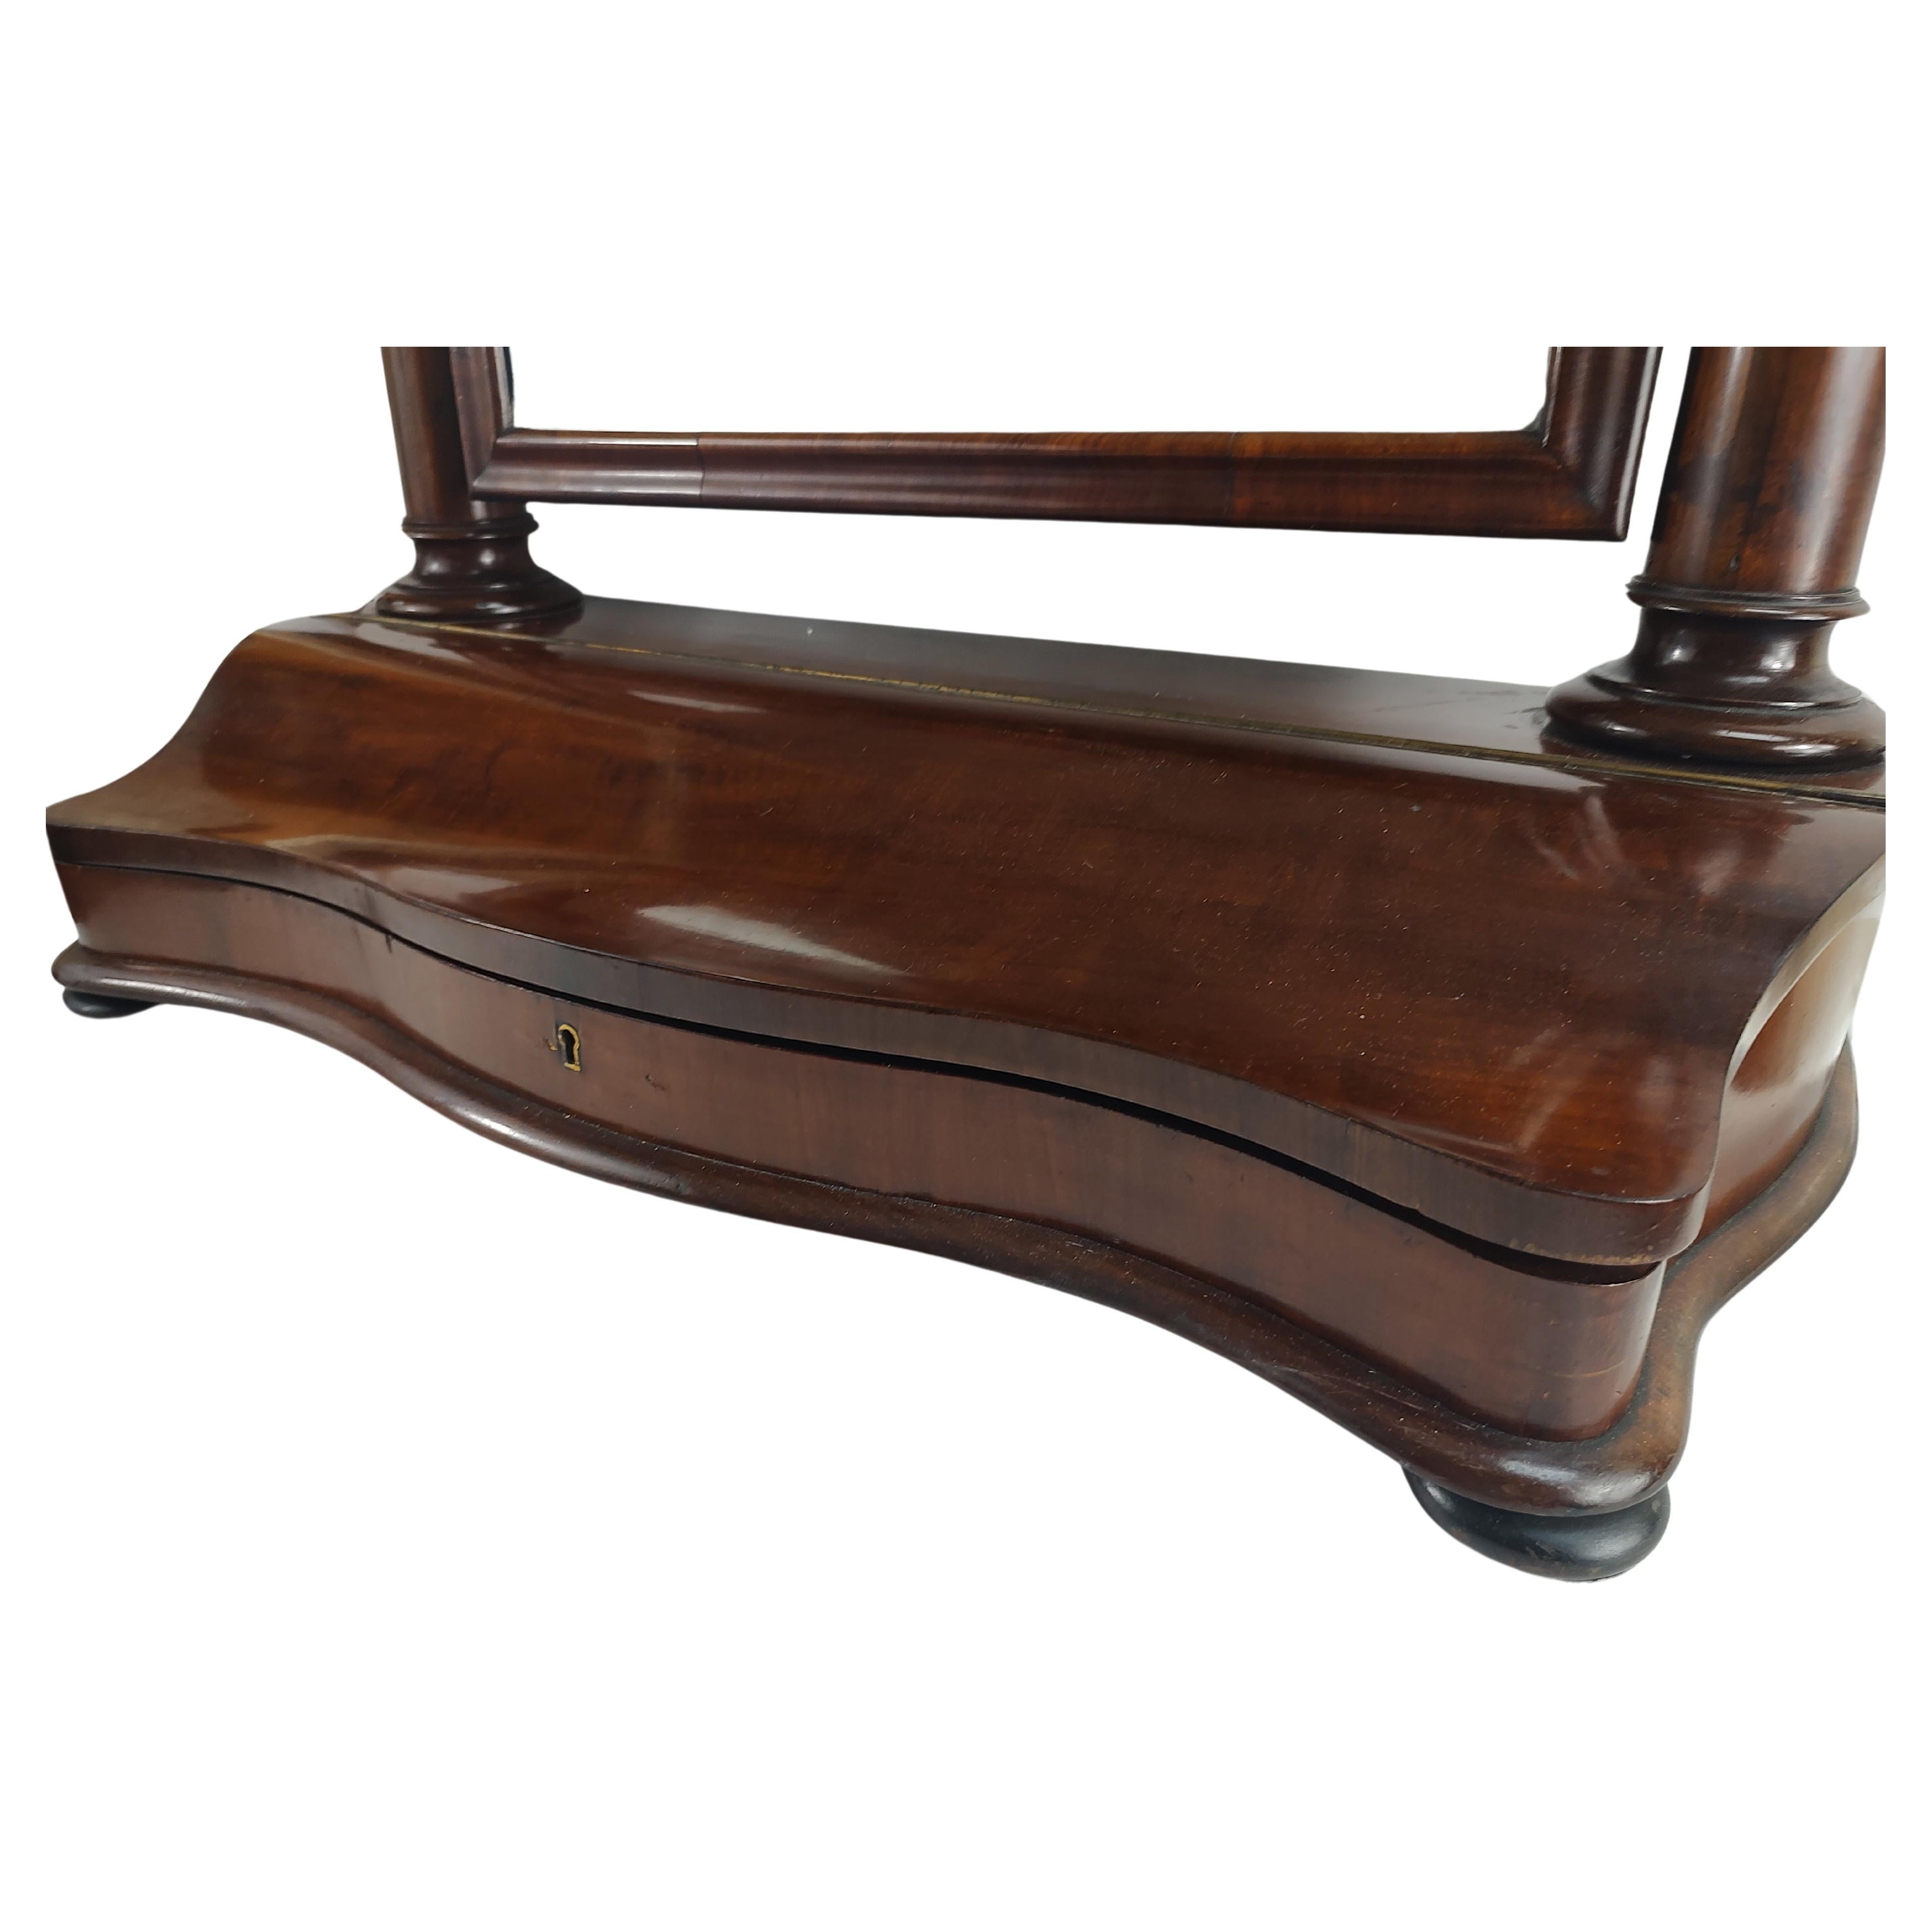 Fantastic elegant mahogany tabletop shaving mirror with large lidded felt lined box for storage. Mid to late 19thc English Regency mirror.  Columns flank each side with bun feet. High quality brass components such as a piano hinge and a pair of